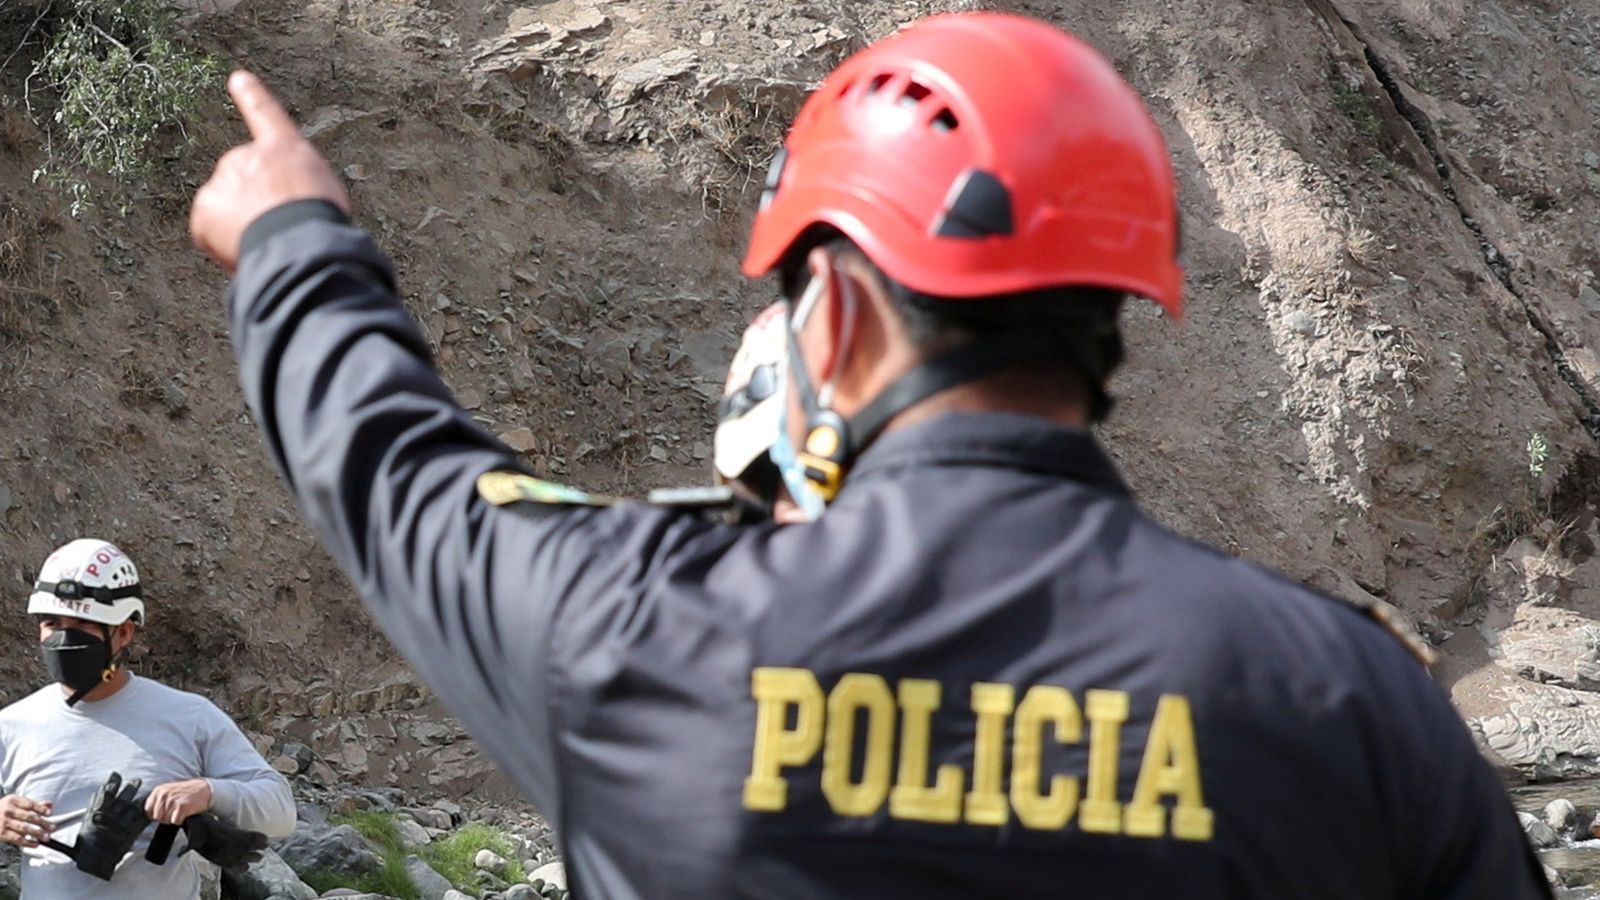 Peru gold mine fire kills 27 people - the country's deadliest mining accident in two decades